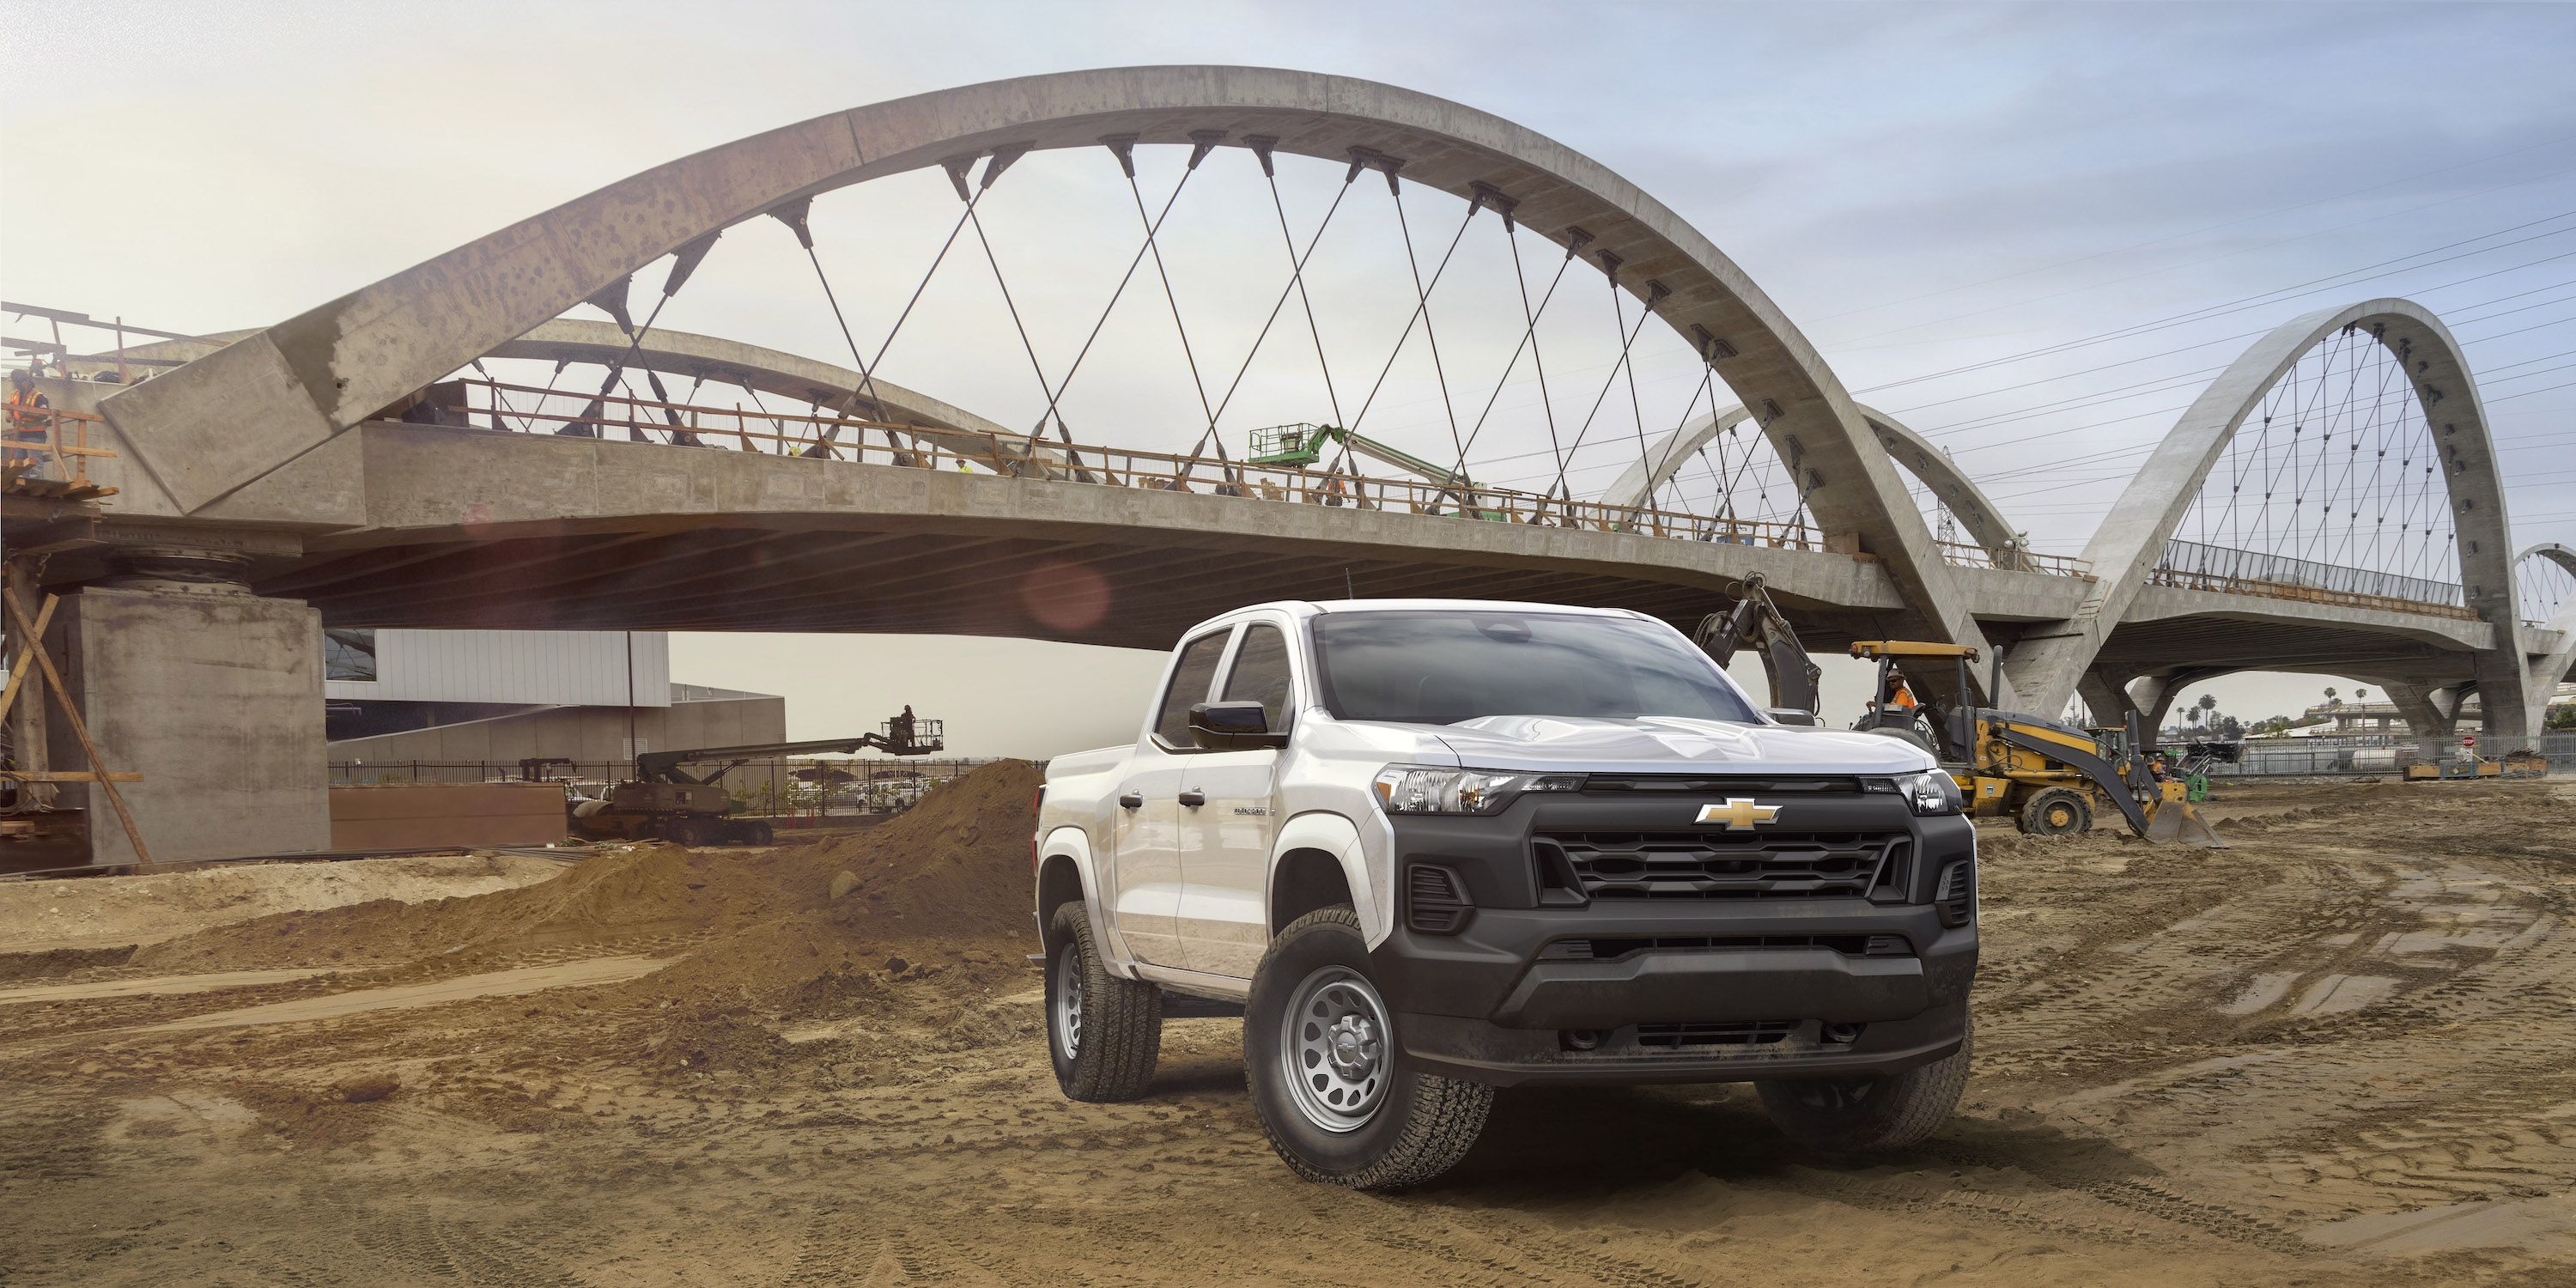 Chevy Colorado Owners Can Get ZR2 Engine Tune for $395 at Dealer